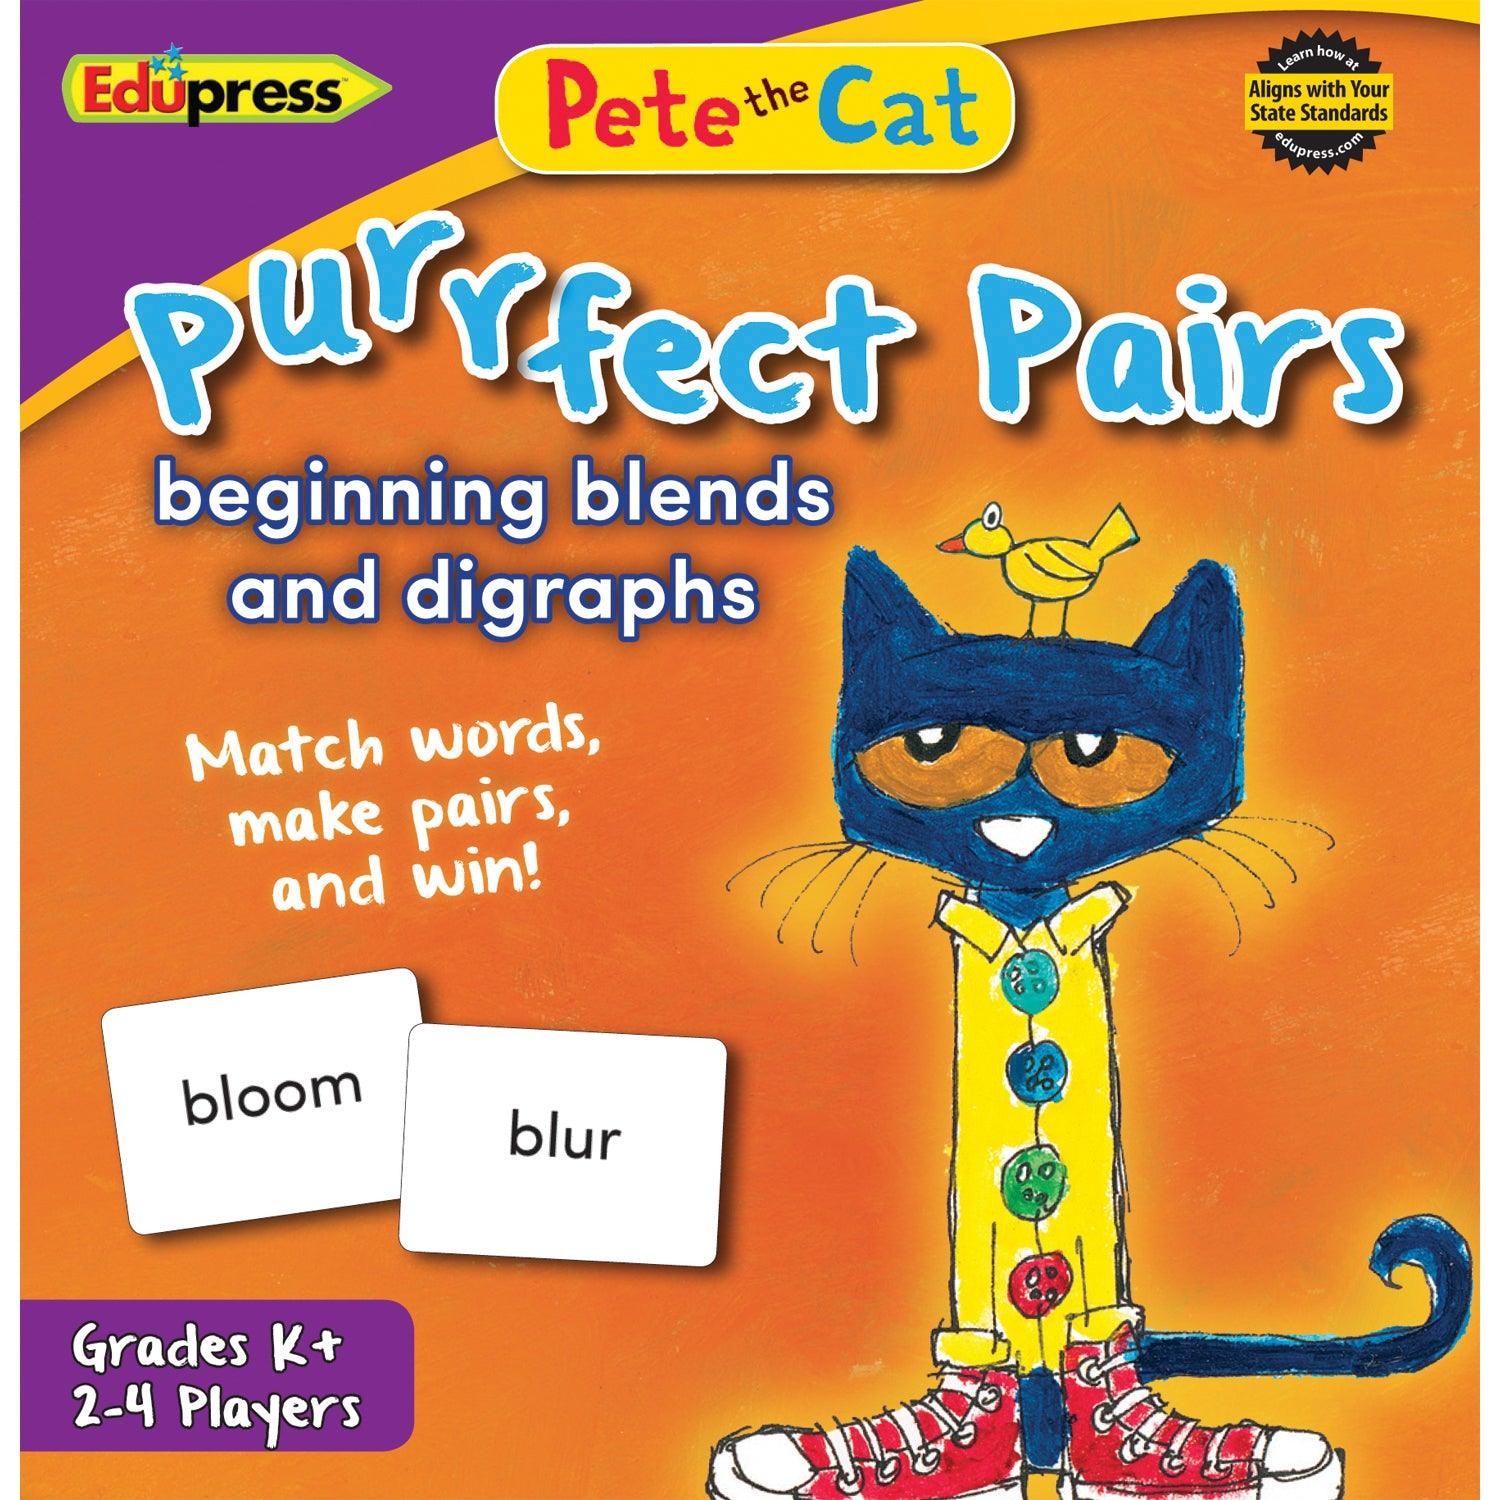 Pete the Cat® Purrfect Pairs Game Beginning Blends and Digraphs - Loomini